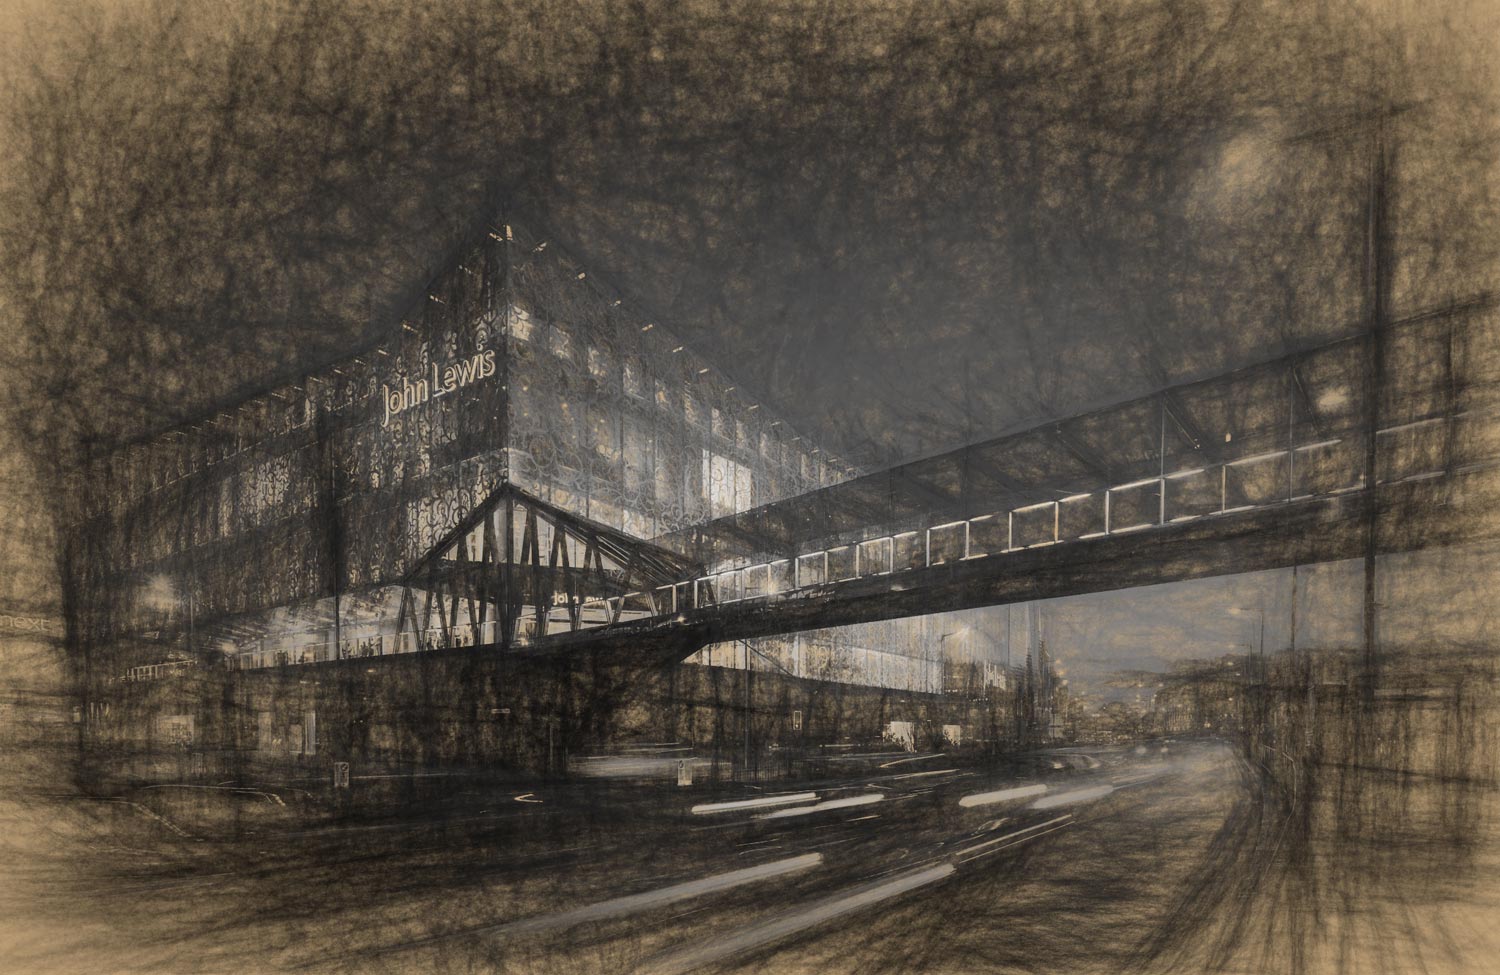 sketch style view of night-time photo